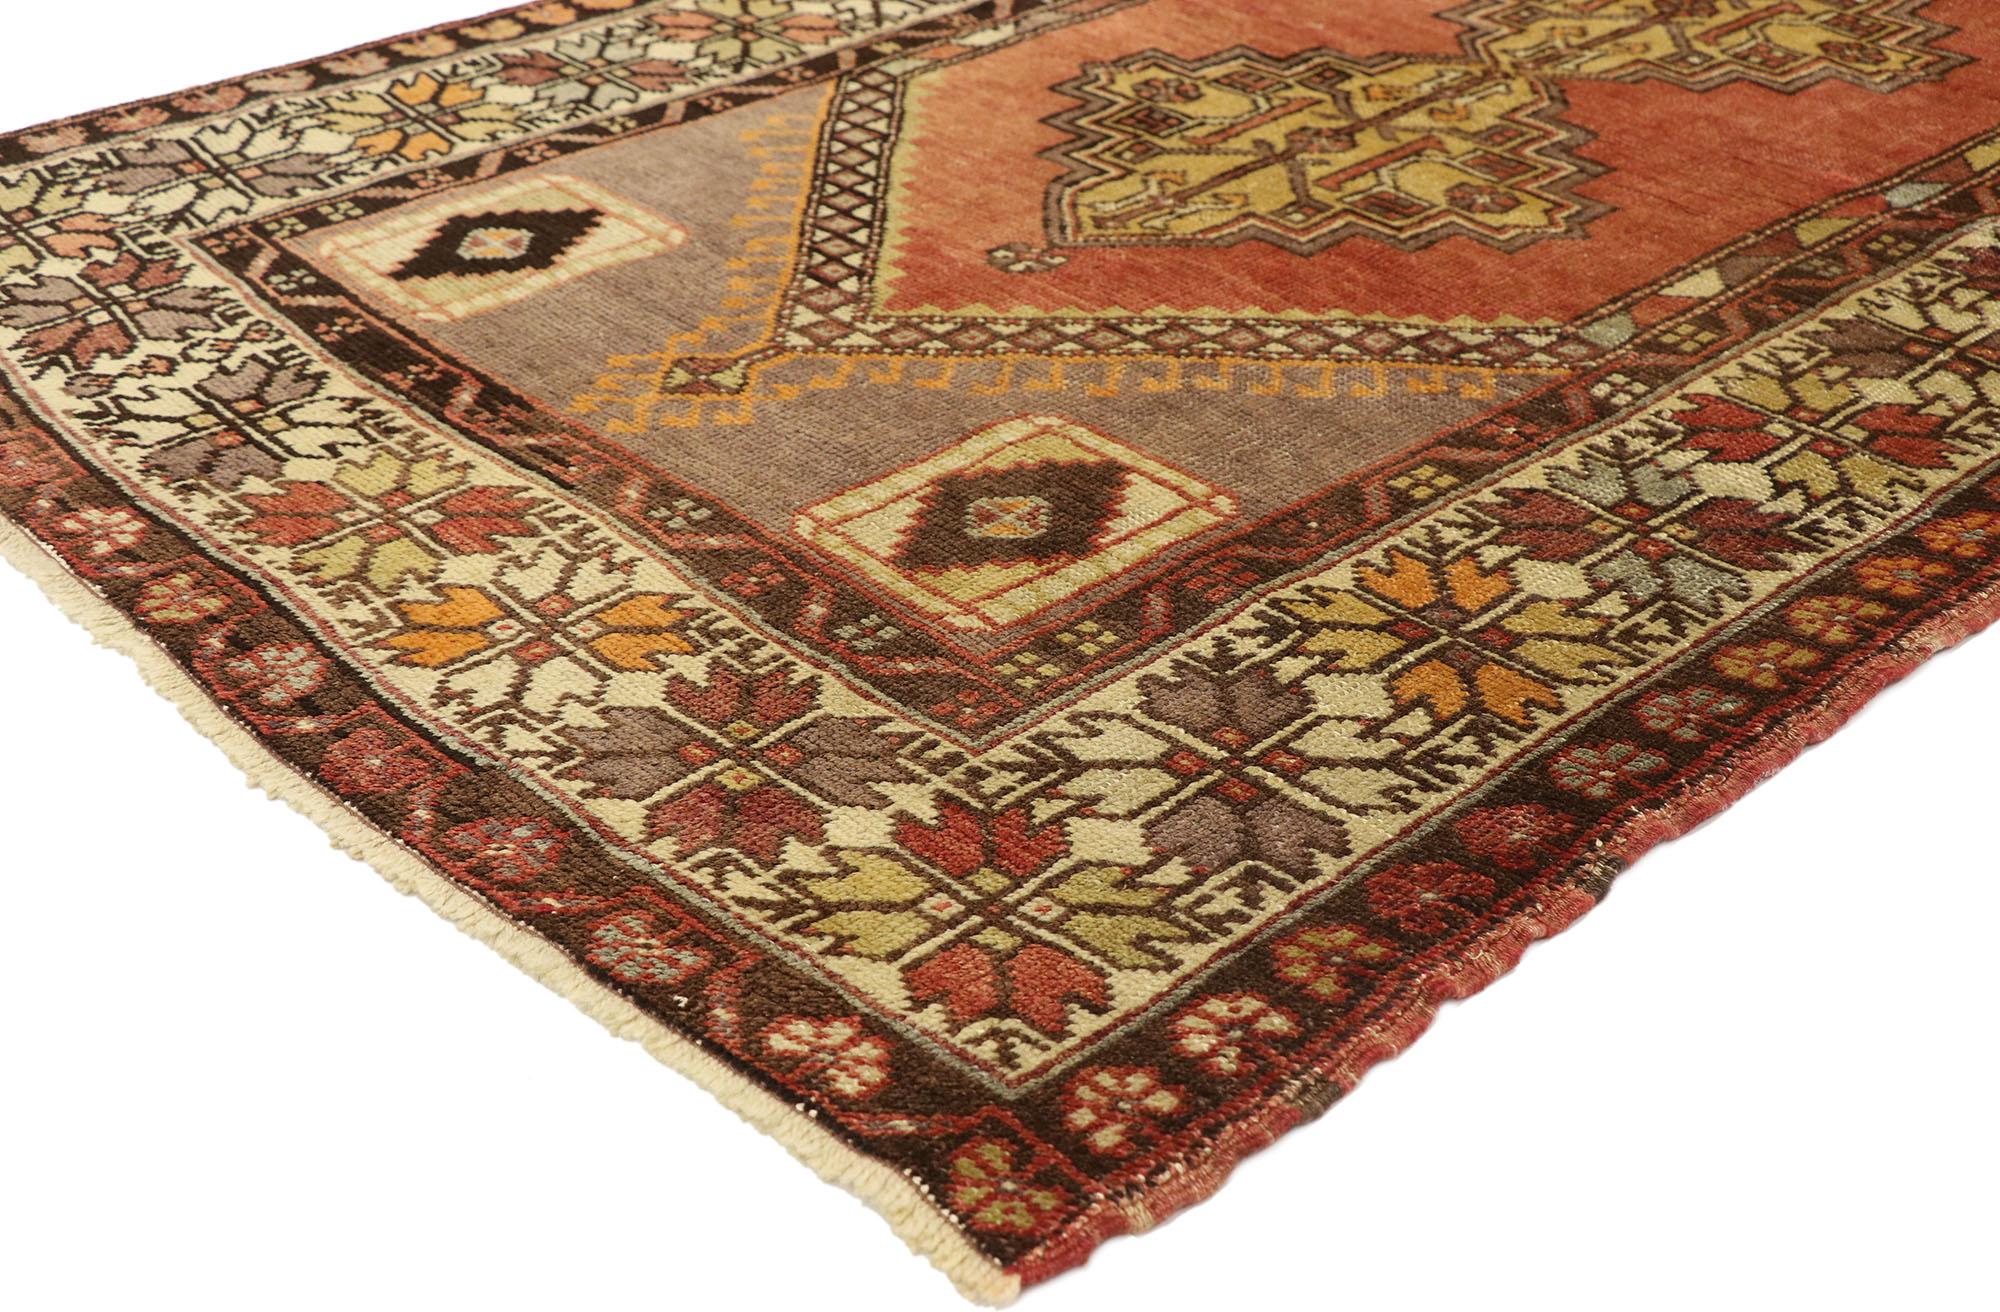 50289 vintage Turkish Oushak Accent rug with Rustic Spanish Revival style. Warm and inviting combined with rustic sensibility, this hand knotted wool vintage Turkish Oushak rug astounds with its rugged beauty. The abrashed latch hook cut-out field